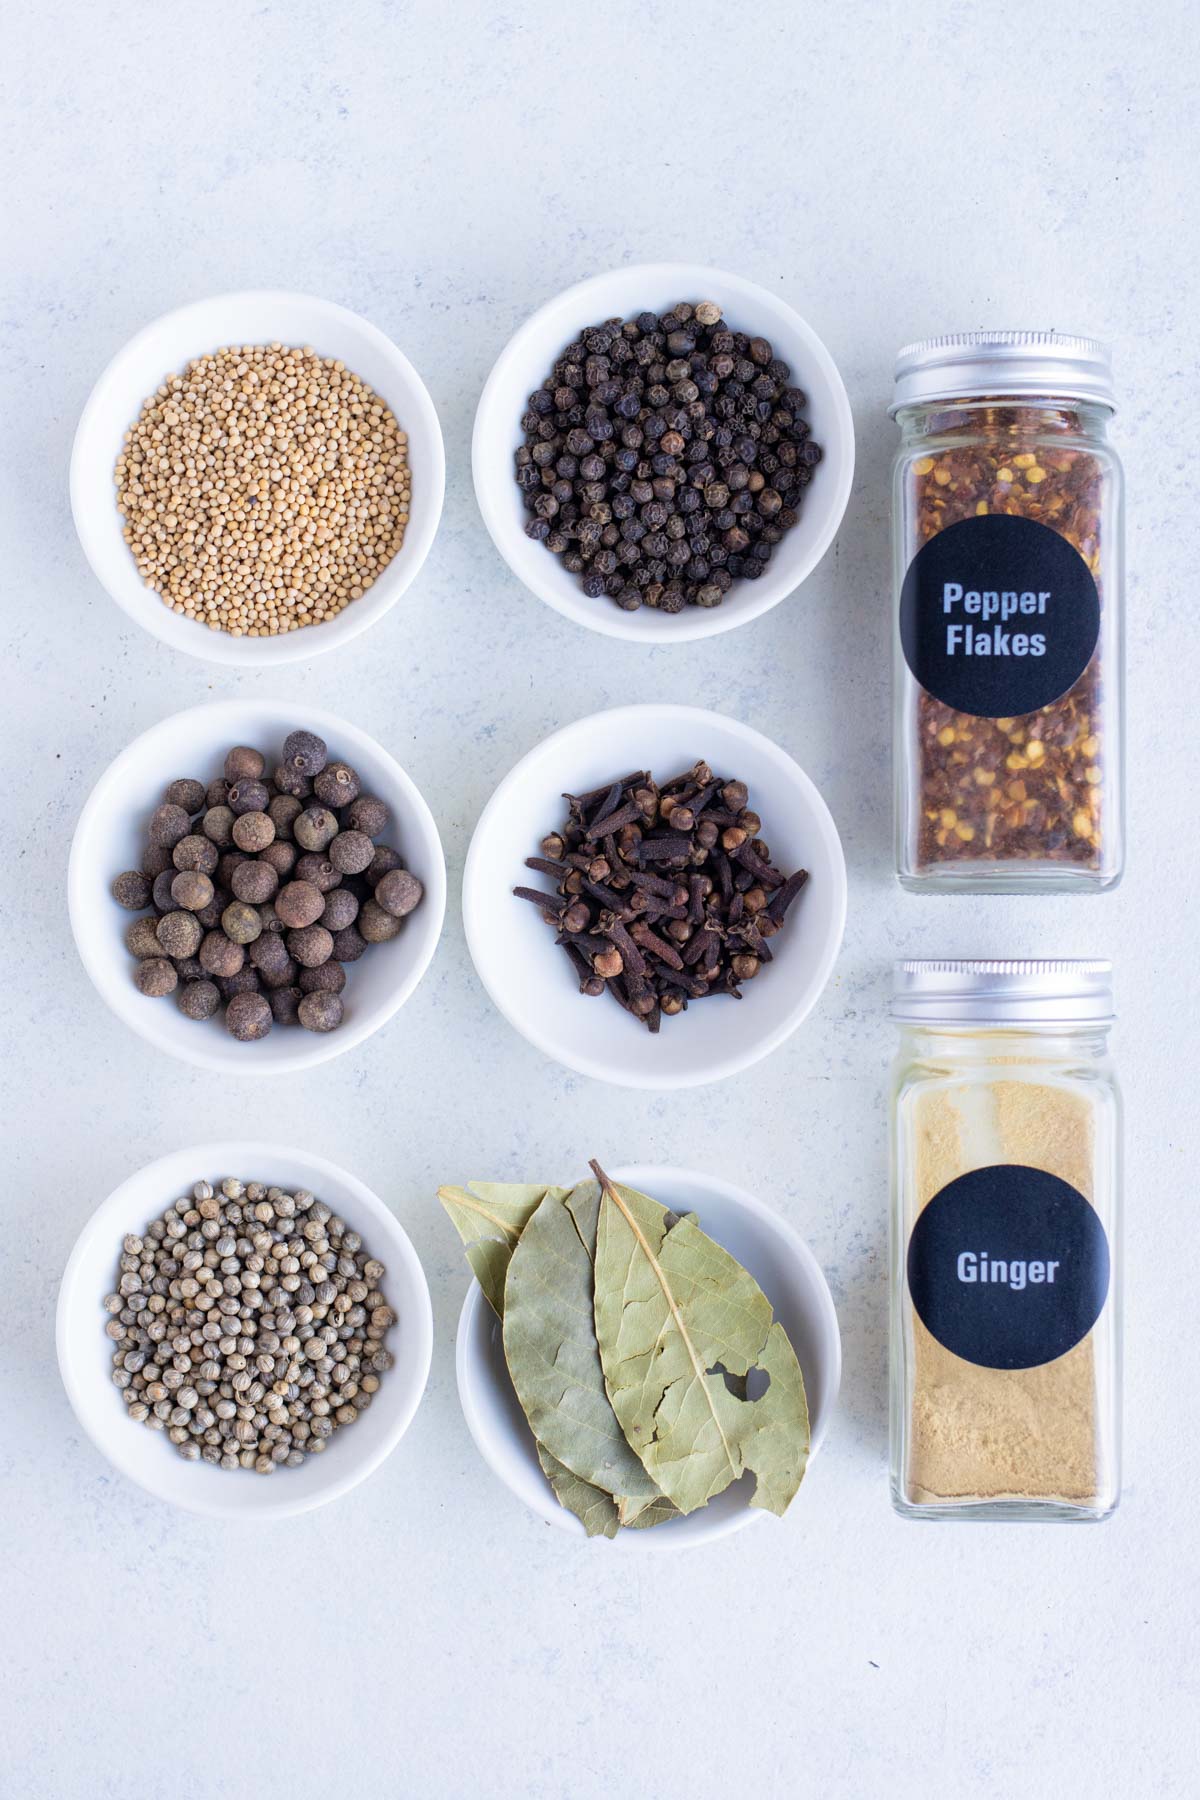 Black peppercorns, yellow mustard seeds. coriander seeds, bay leaves, red pepper flakes, whole cloves, ground ginger, allspice berries, and dill seed are the ingredients for this recipe.